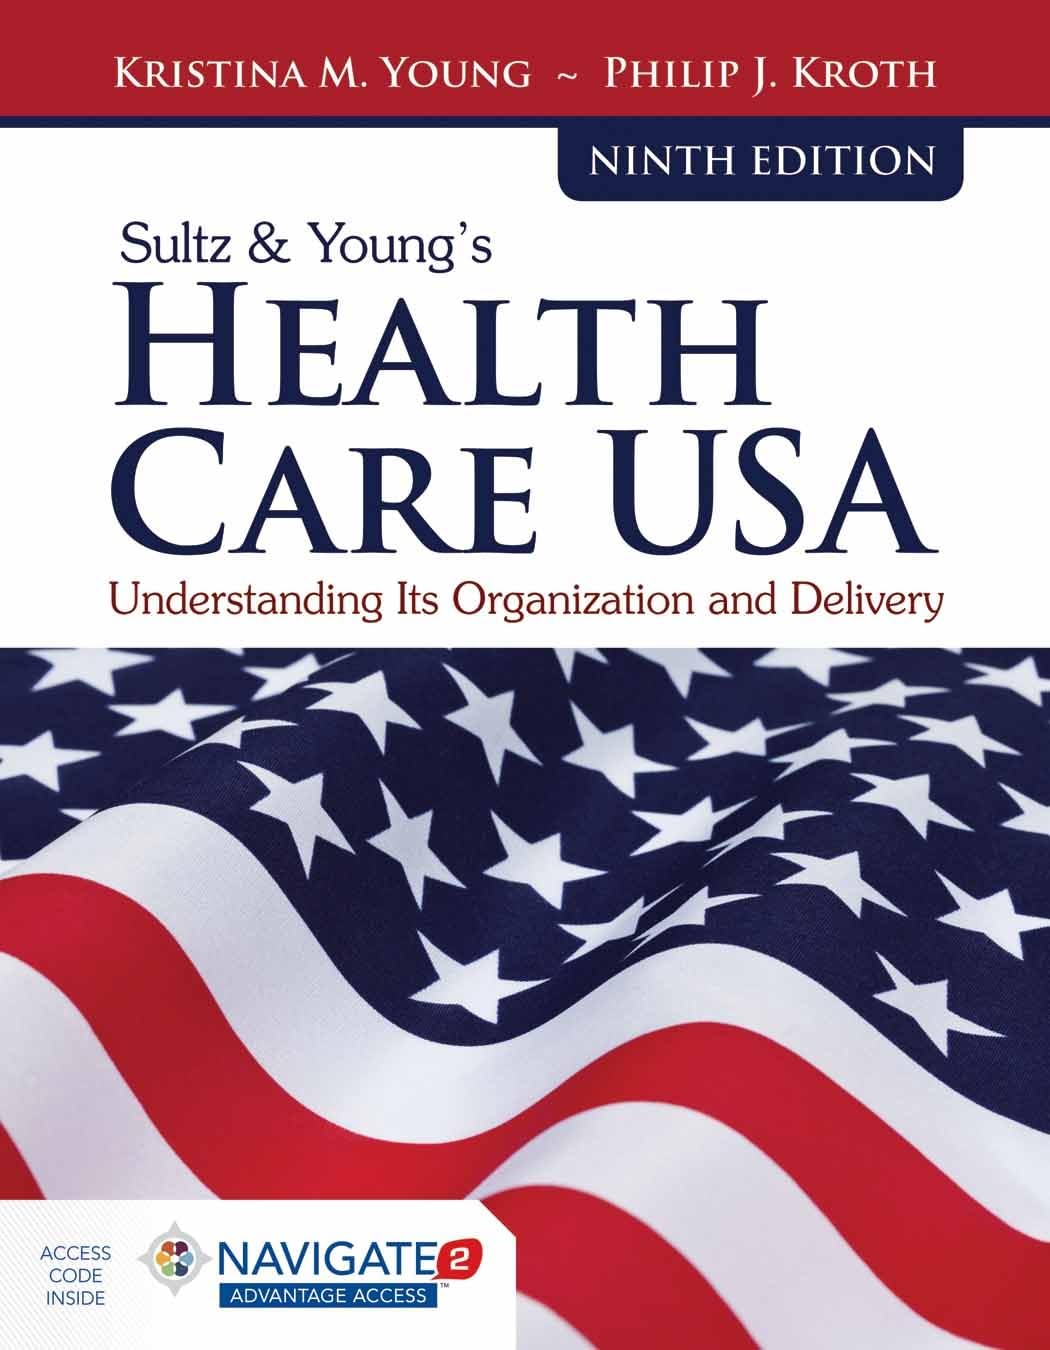 test bank for the book "Sultz & Young's Health Care USA"